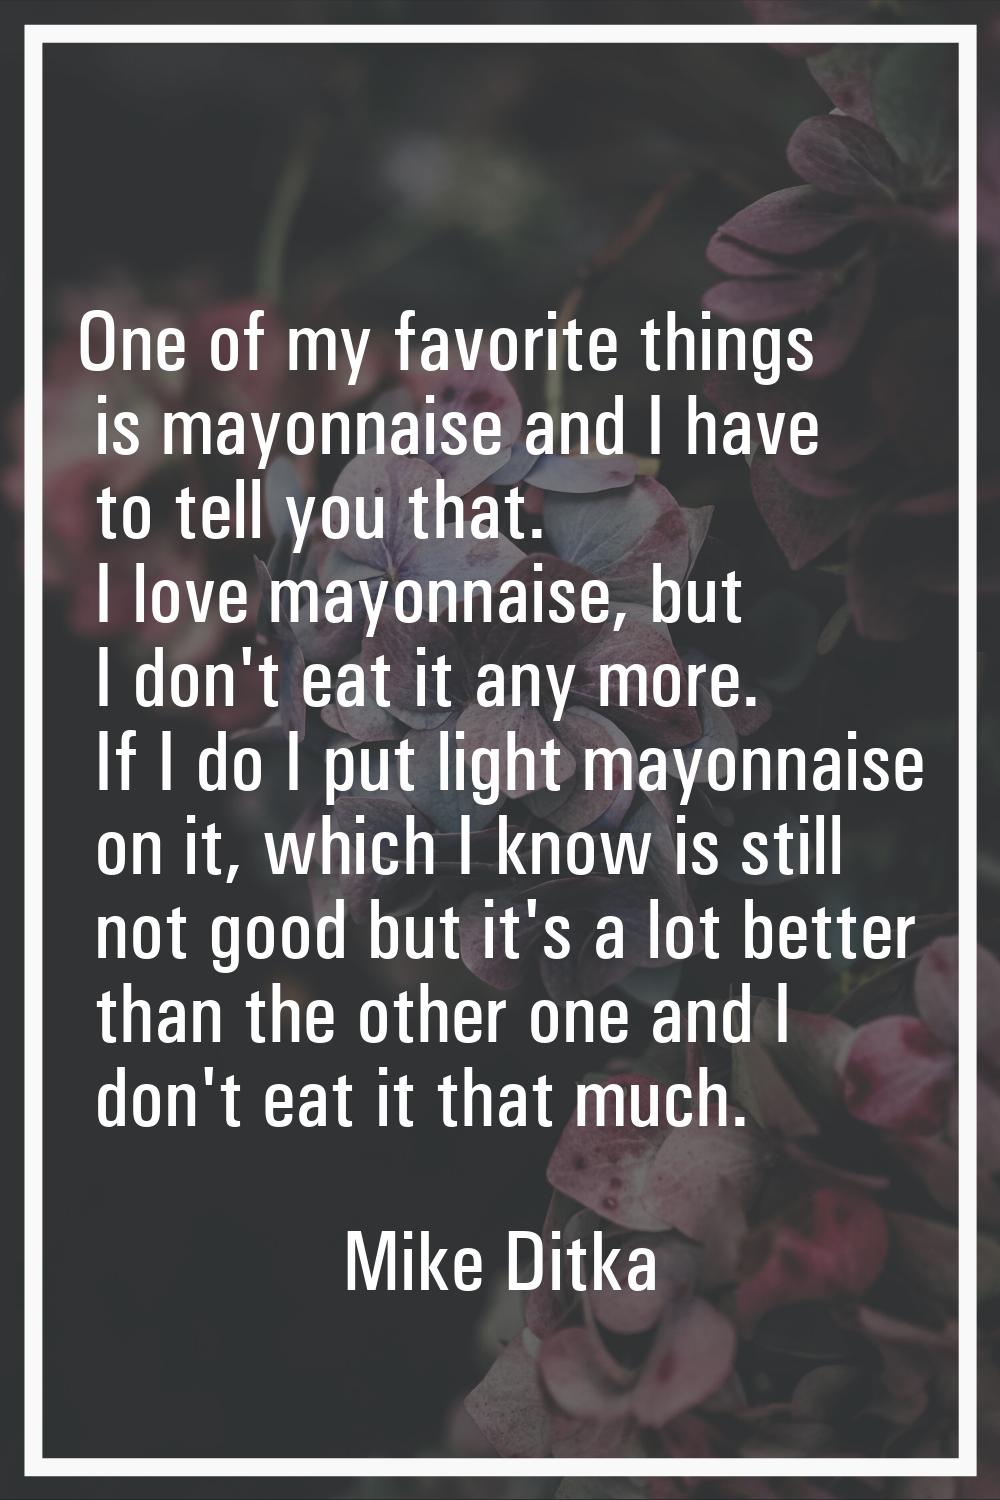 One of my favorite things is mayonnaise and I have to tell you that. I love mayonnaise, but I don't